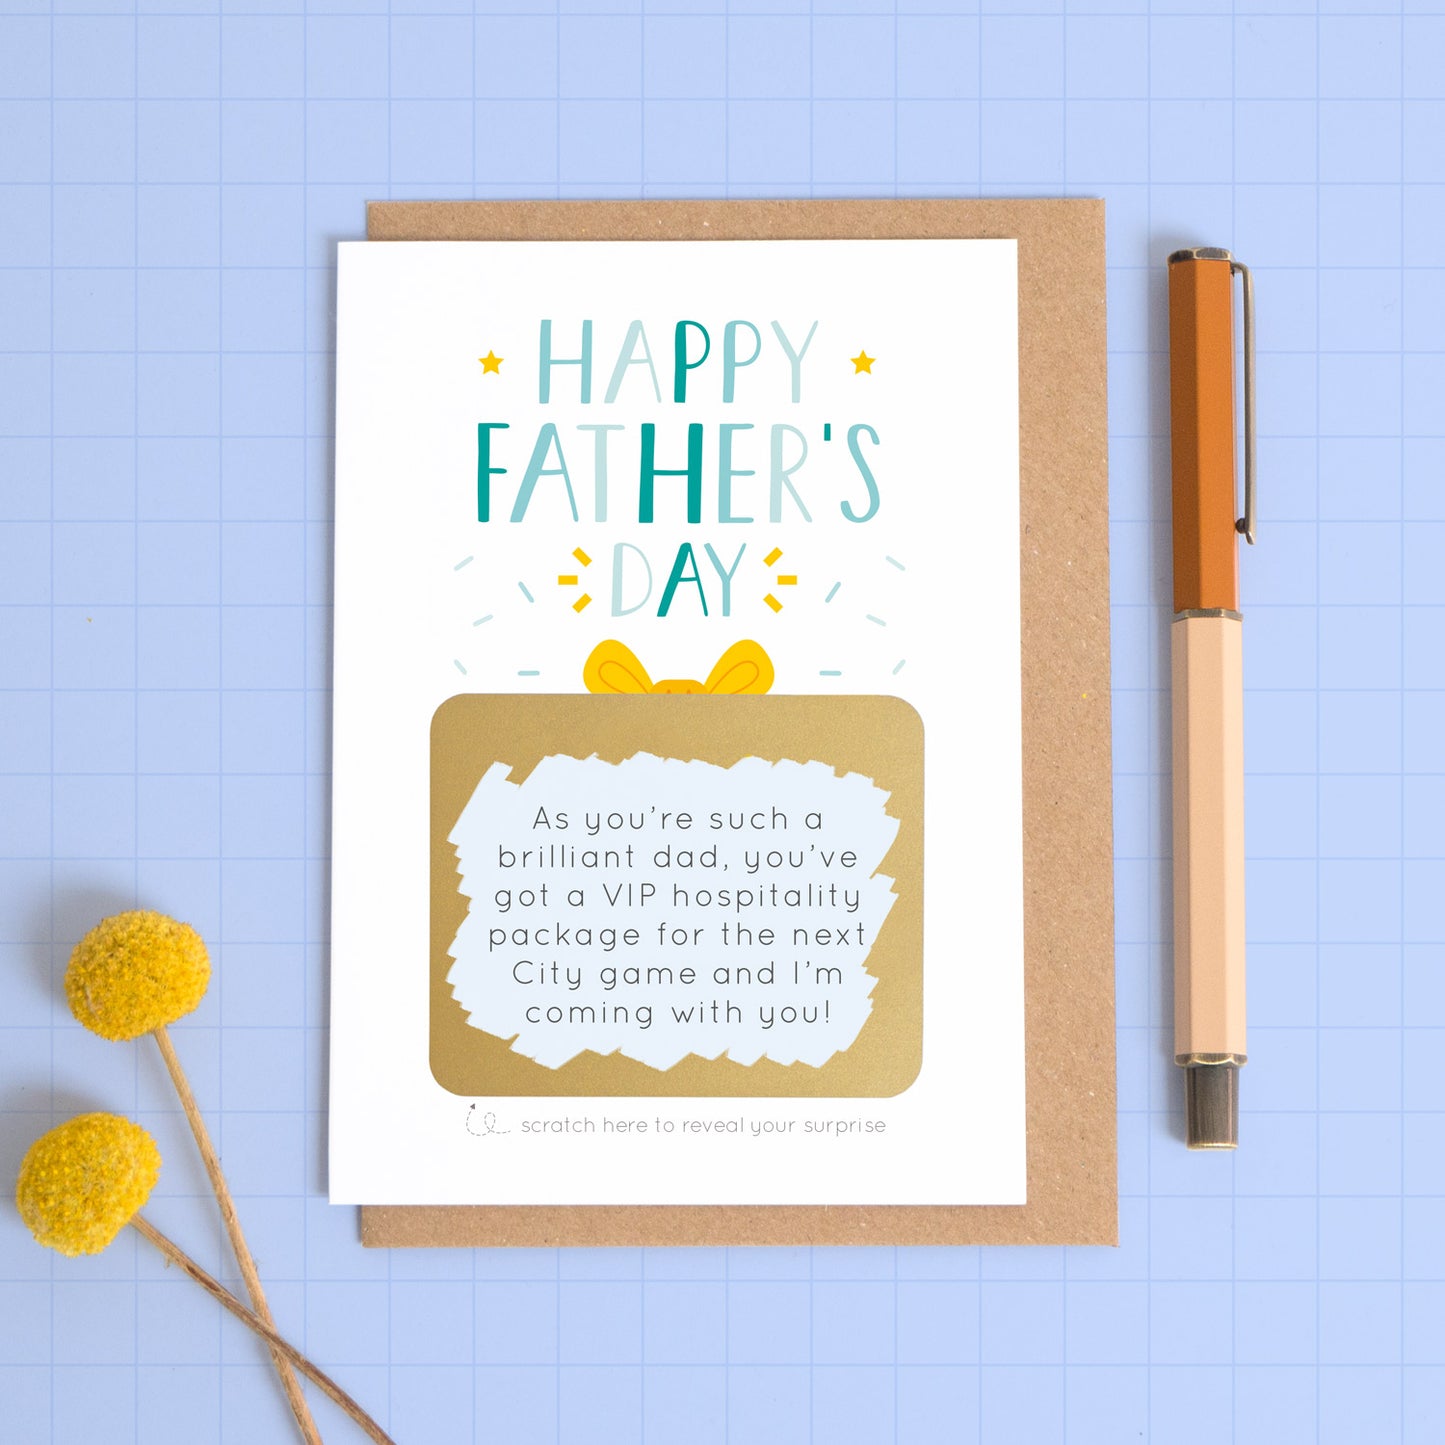 A personalised Father’s day scratch card photographed on a blue background with a pop of yellow flowers and a pen for scale. This image shows the blue version of the card with the golden present scratched off to reveal the message.